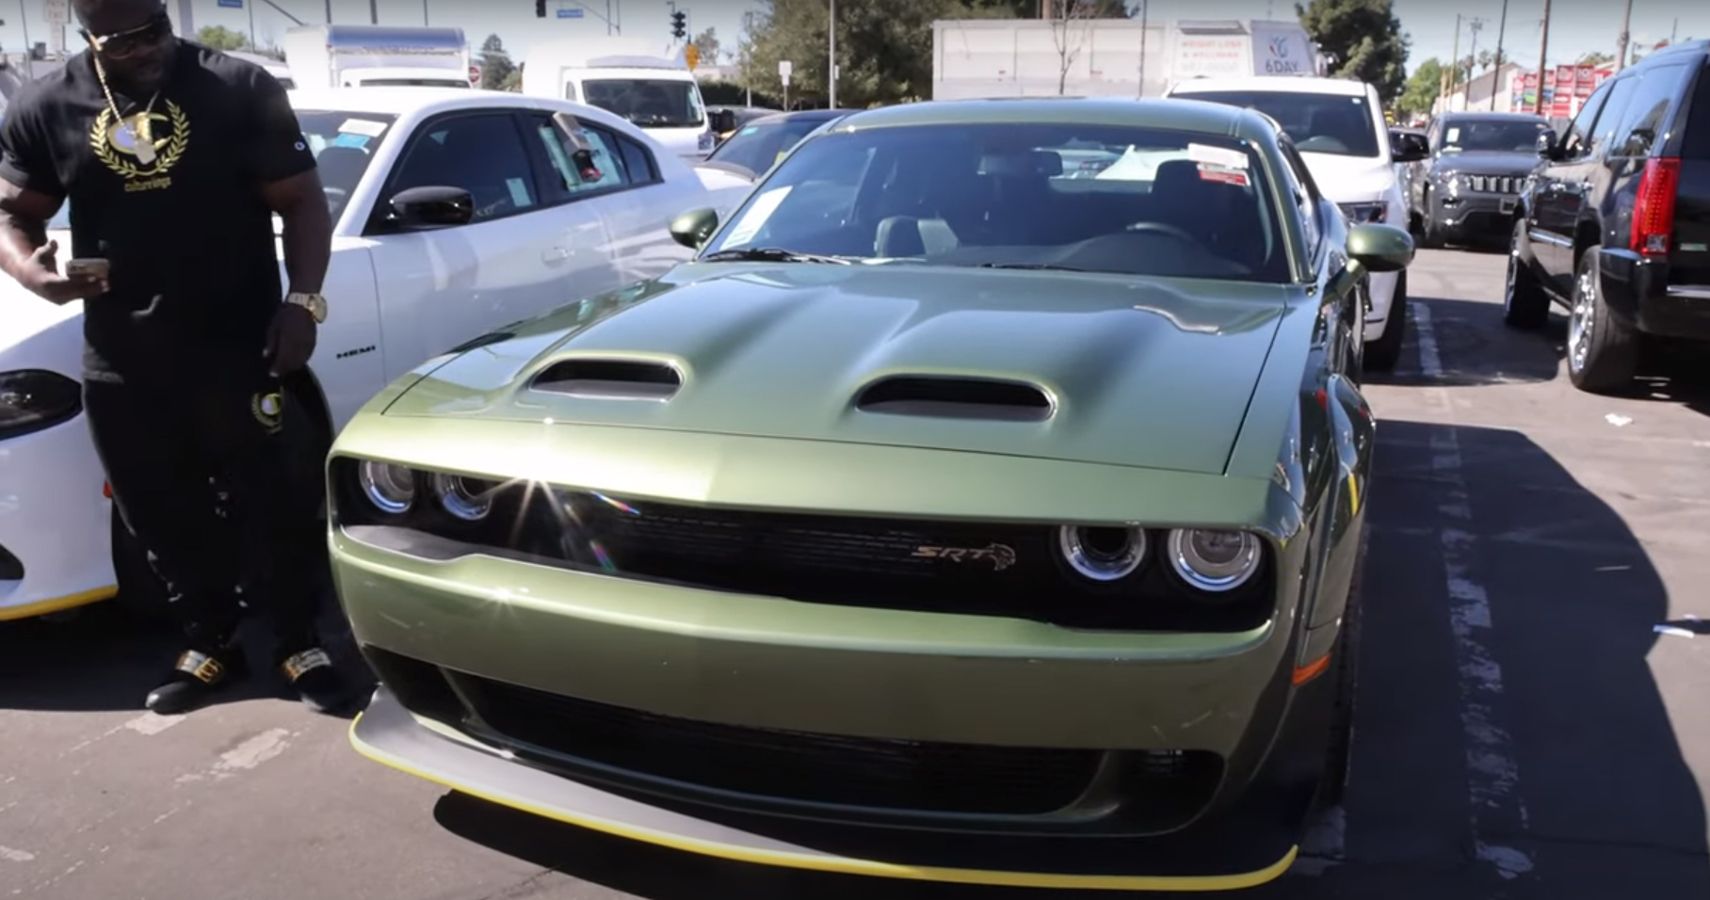 Kali Muscle poses with a 2021 Dodge Challenger Hellcat Redeye